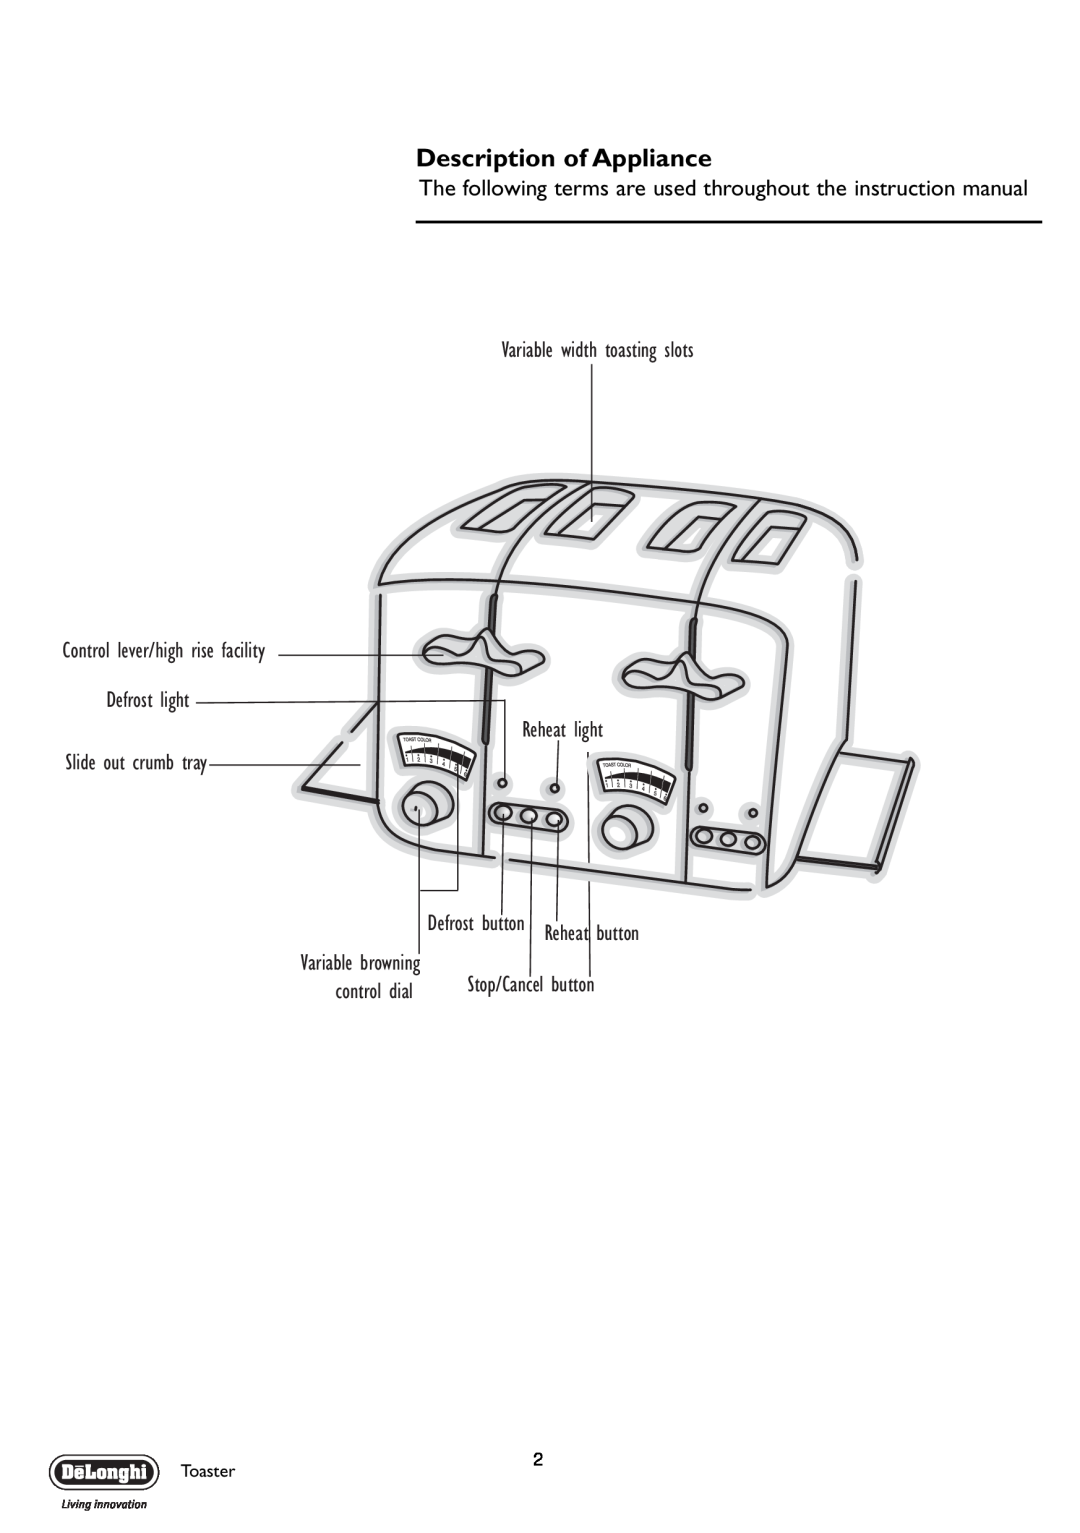 DeLonghi CT04R Description of Appliance, Variable width toasting slots Control lever/high rise facility, control dial 